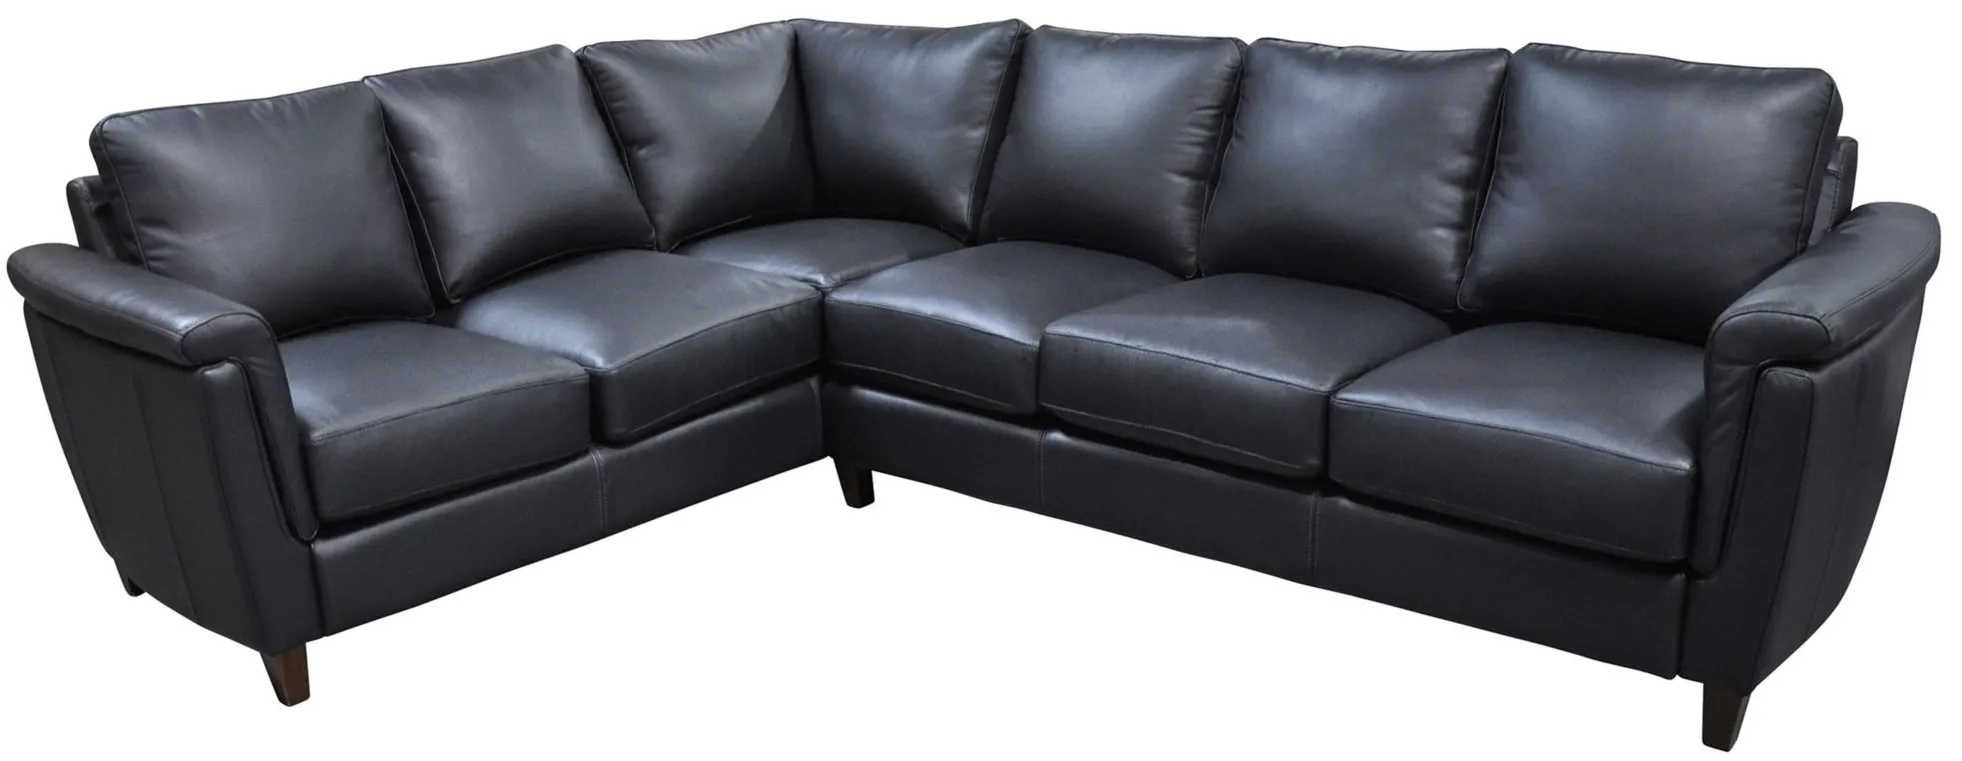 Ellis 2-pc. Sectional Sofa in Denver Black by Omnia Leather